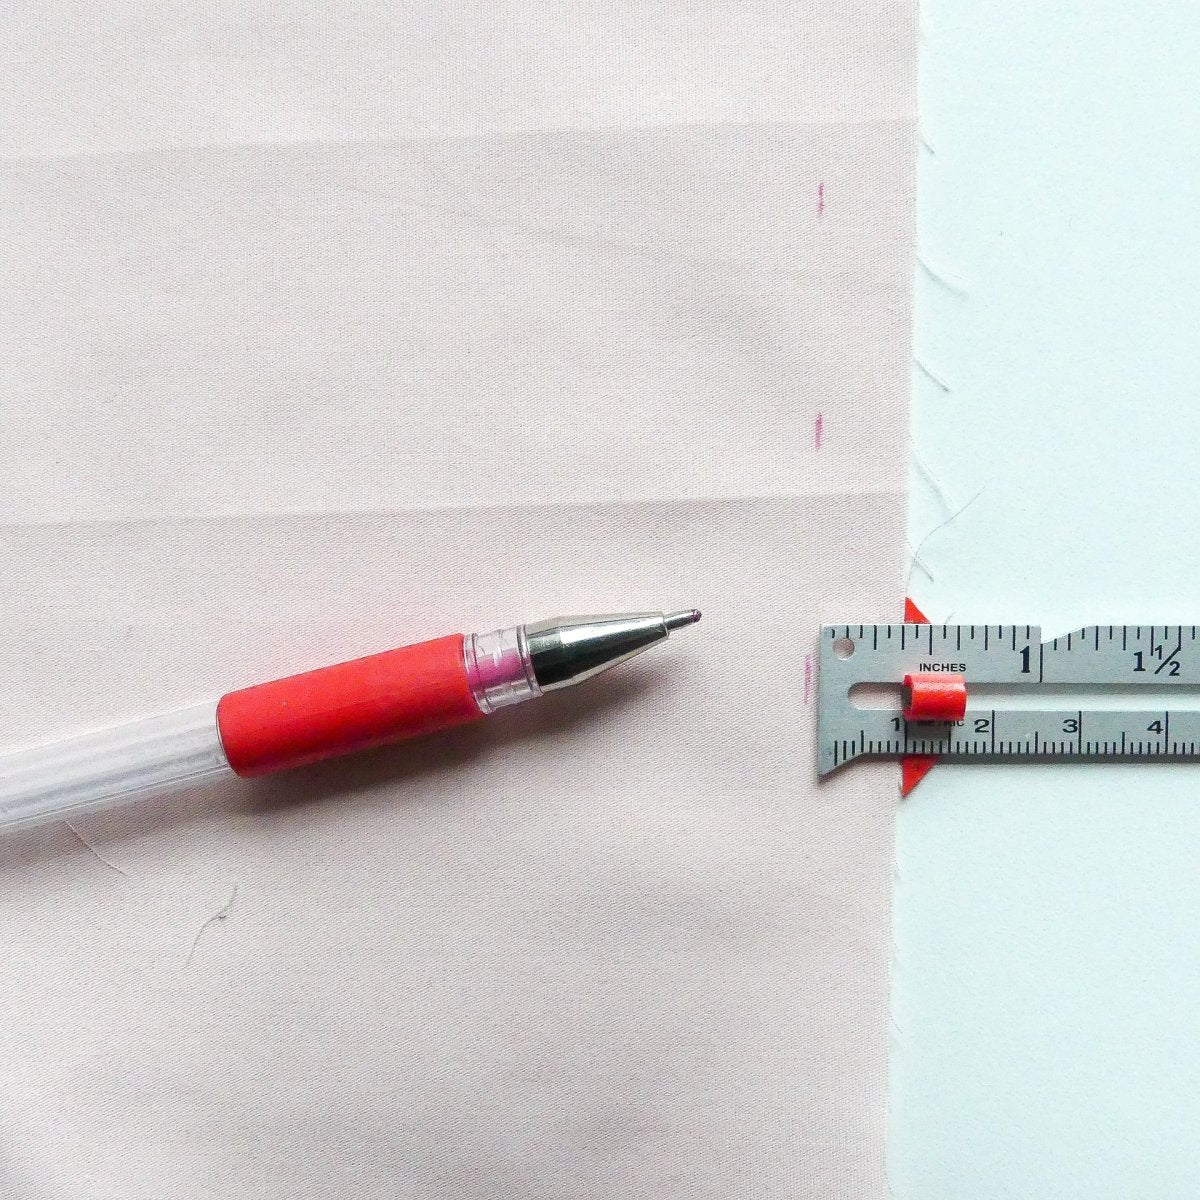 Marking hems on fabric with the measuring gauge and a marking pen